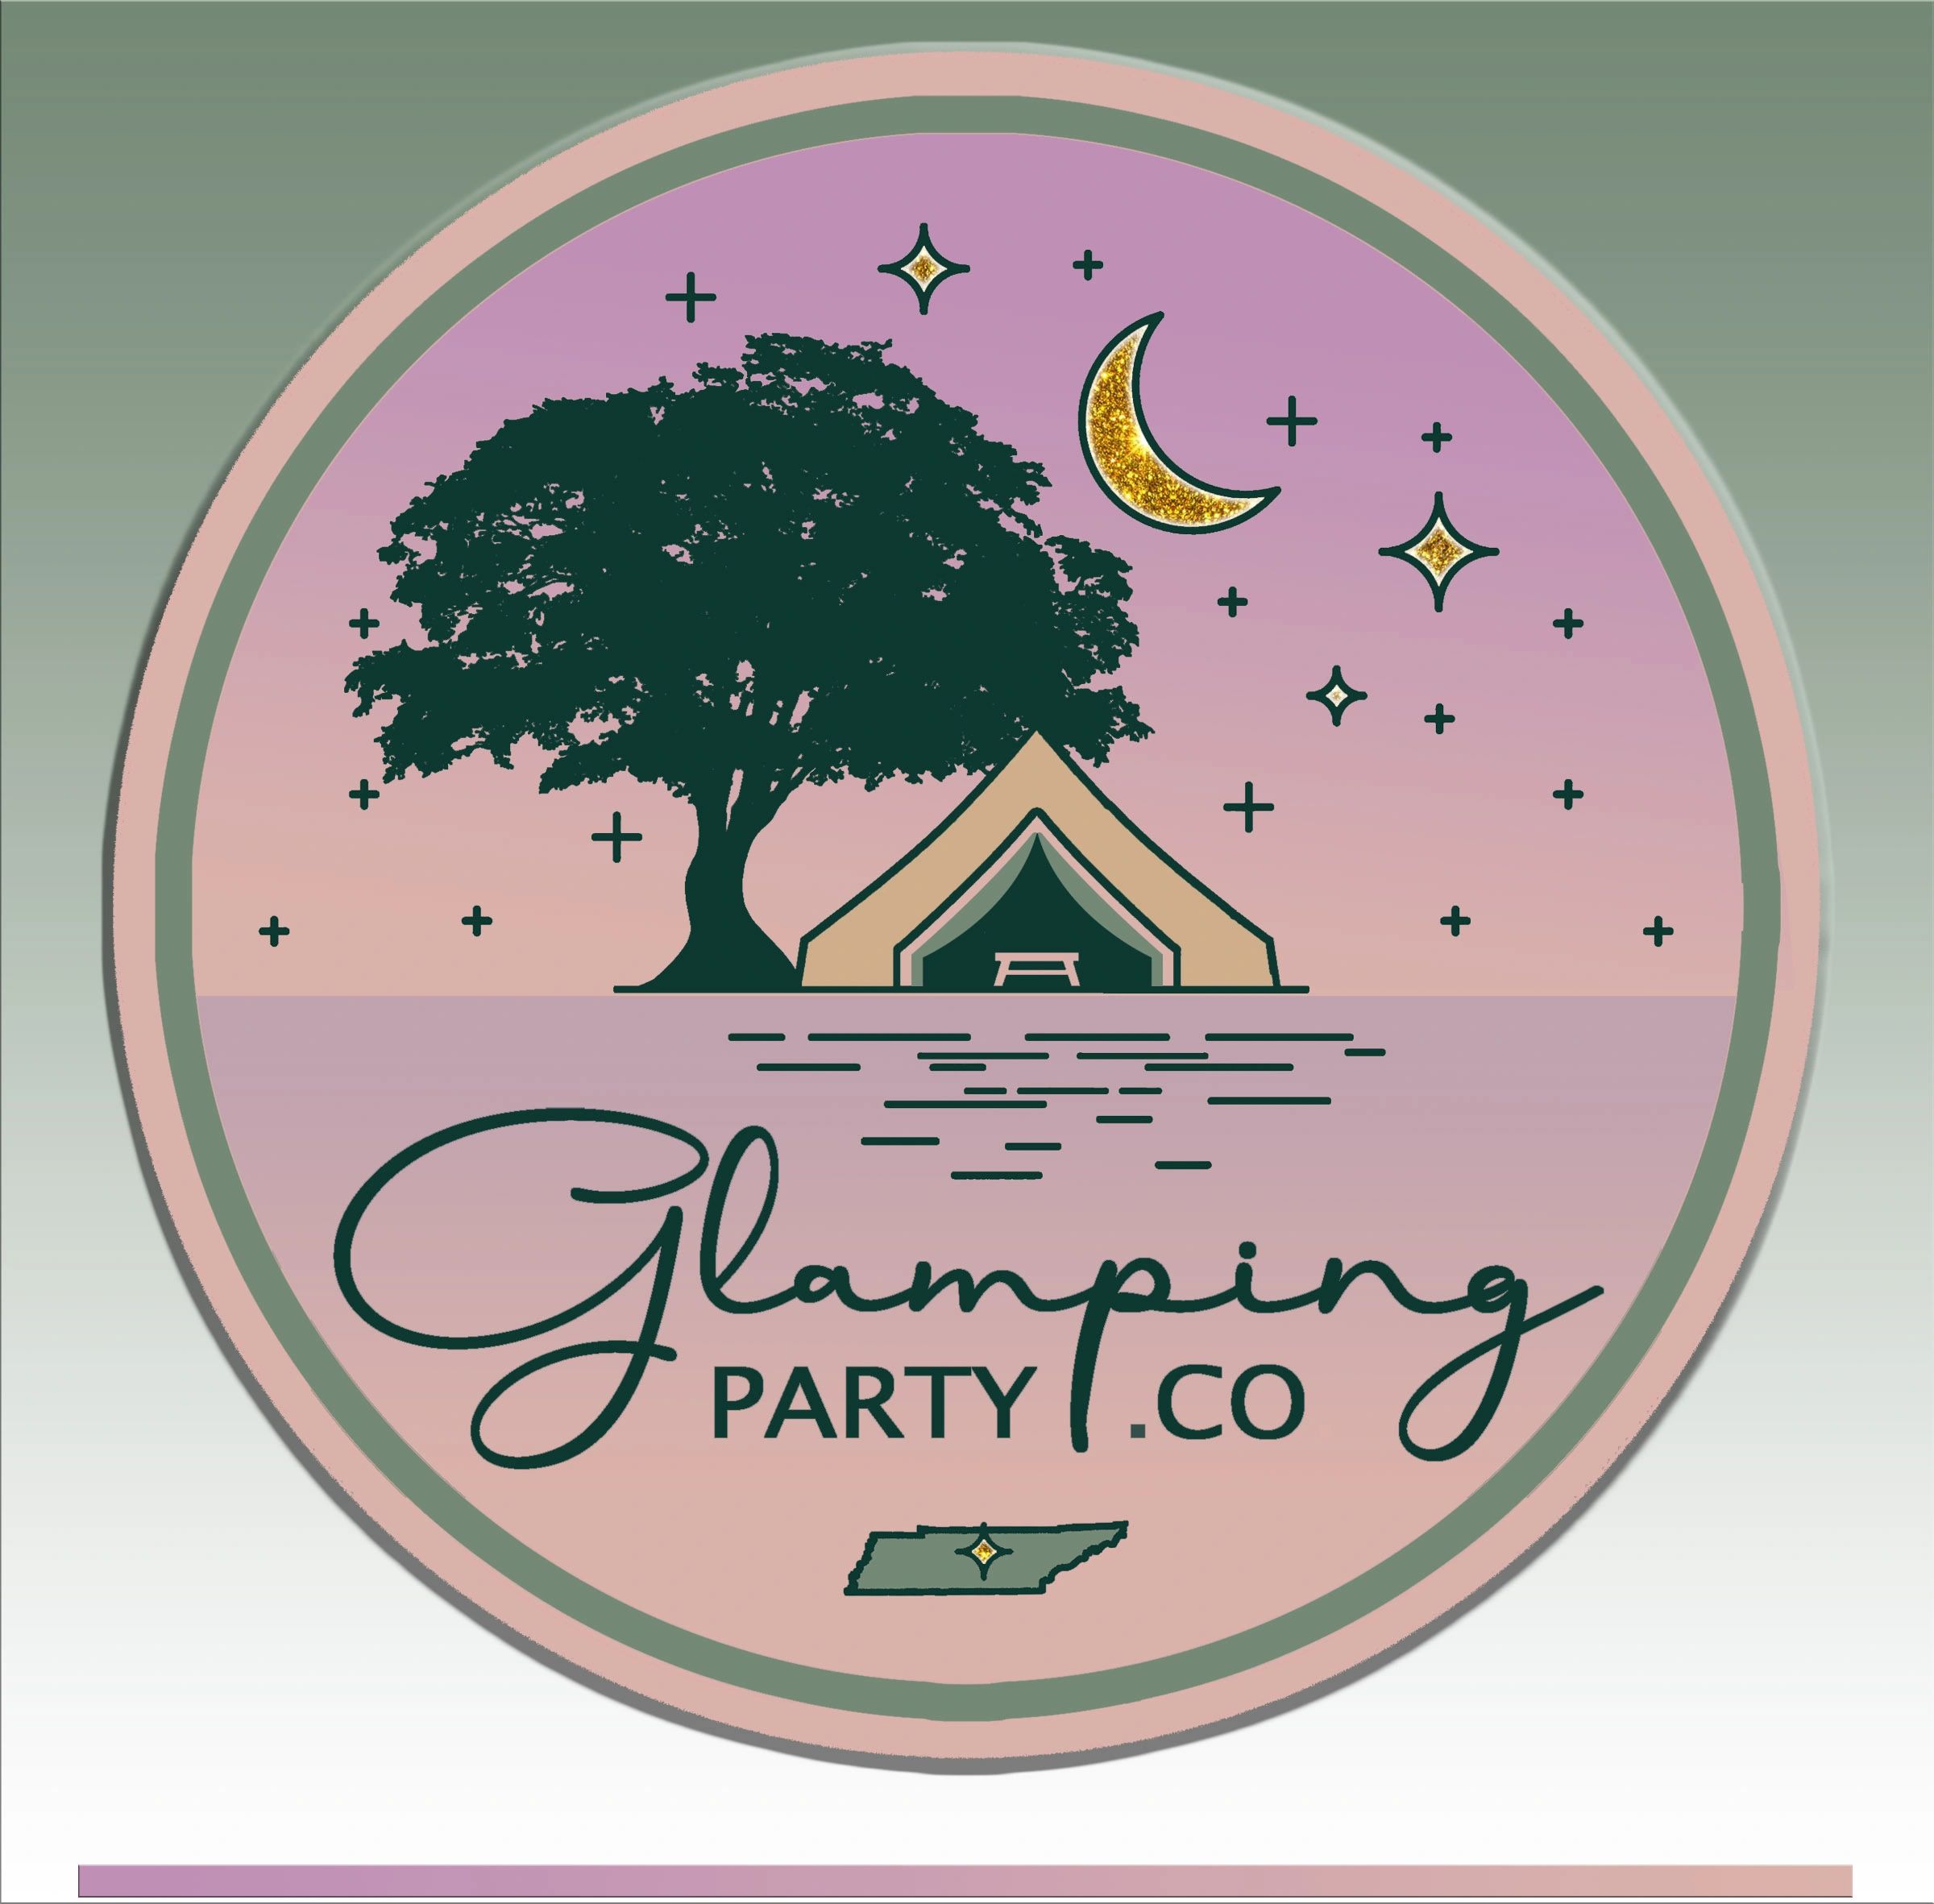 (c) Glampingparty.co